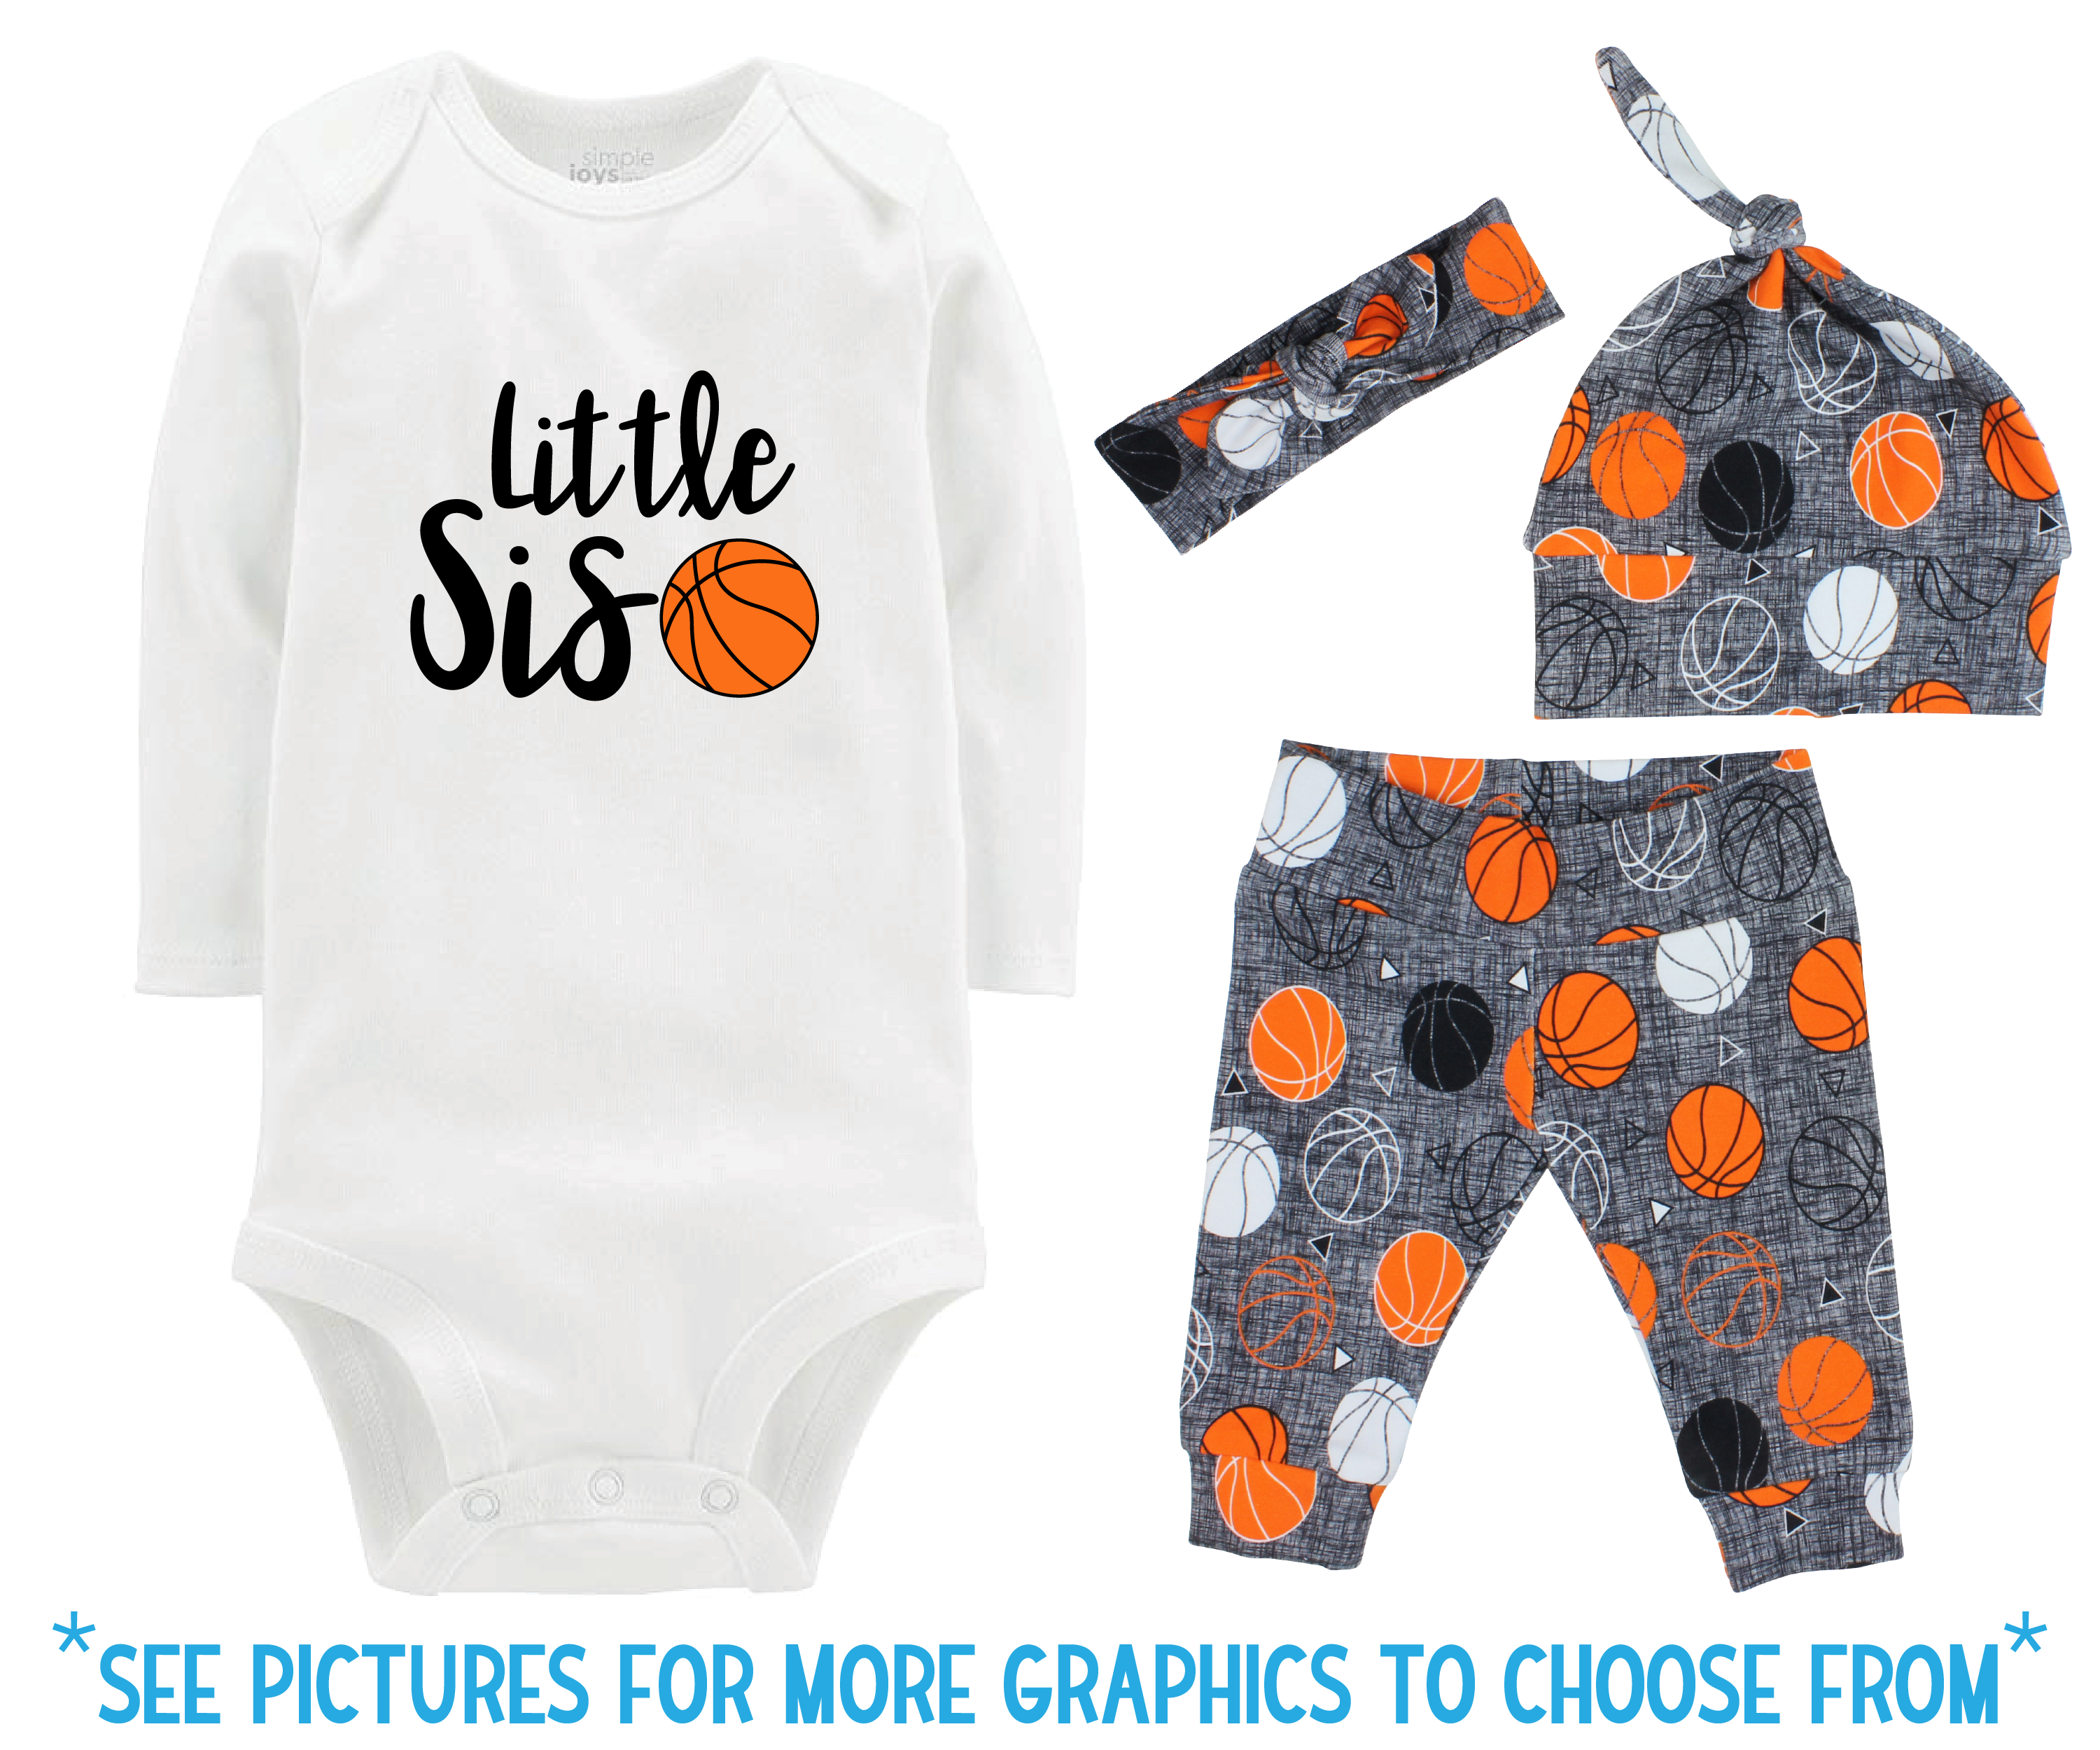 Basketball Baby Outfit